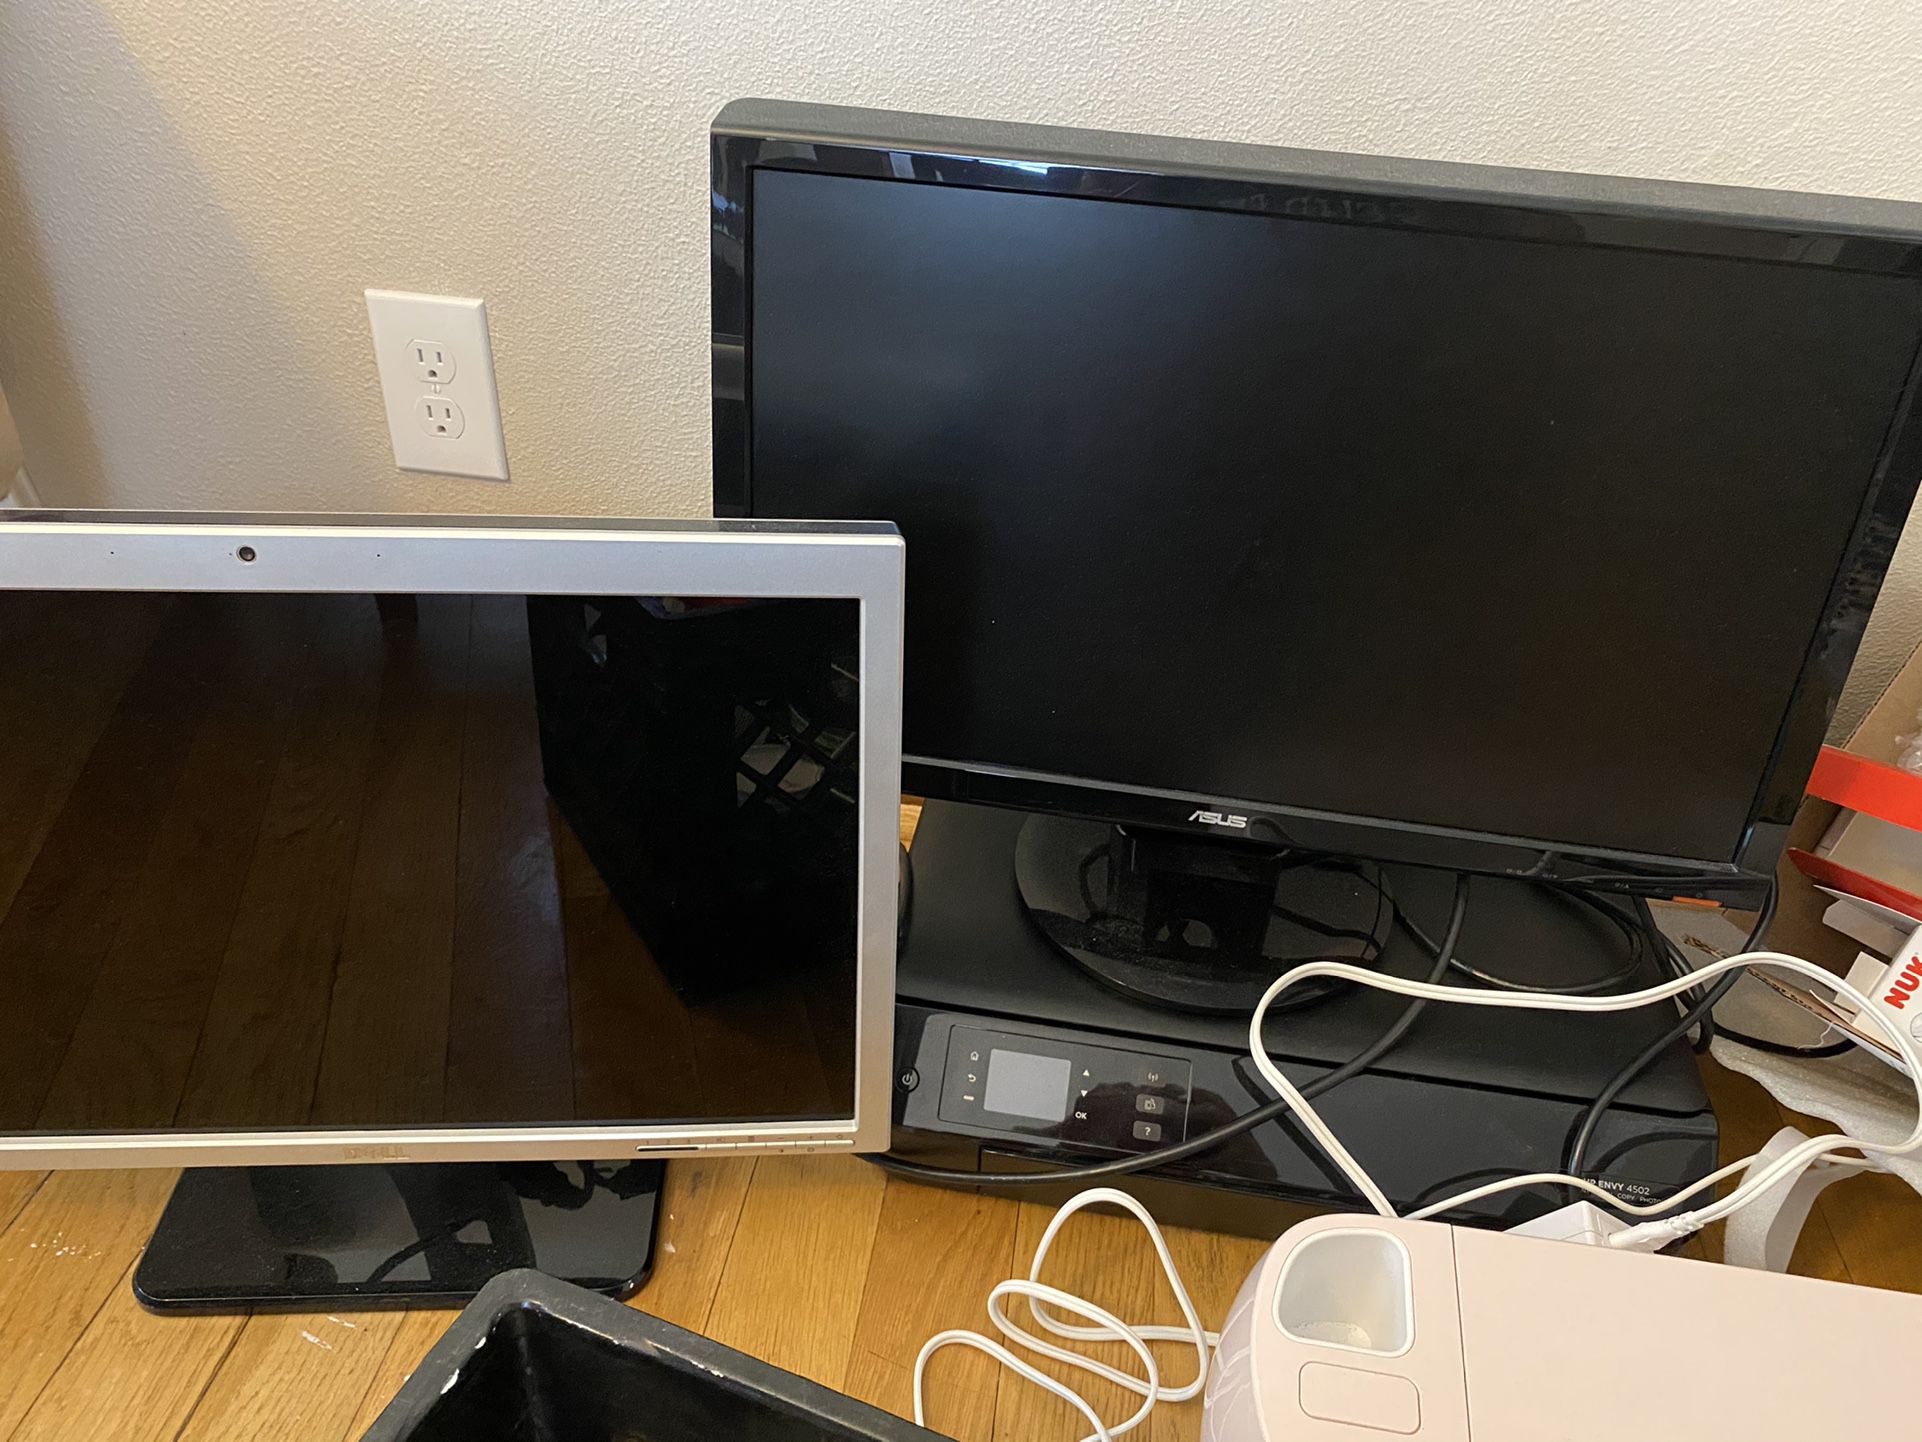 Two 23” Monitors With Internal Speakers